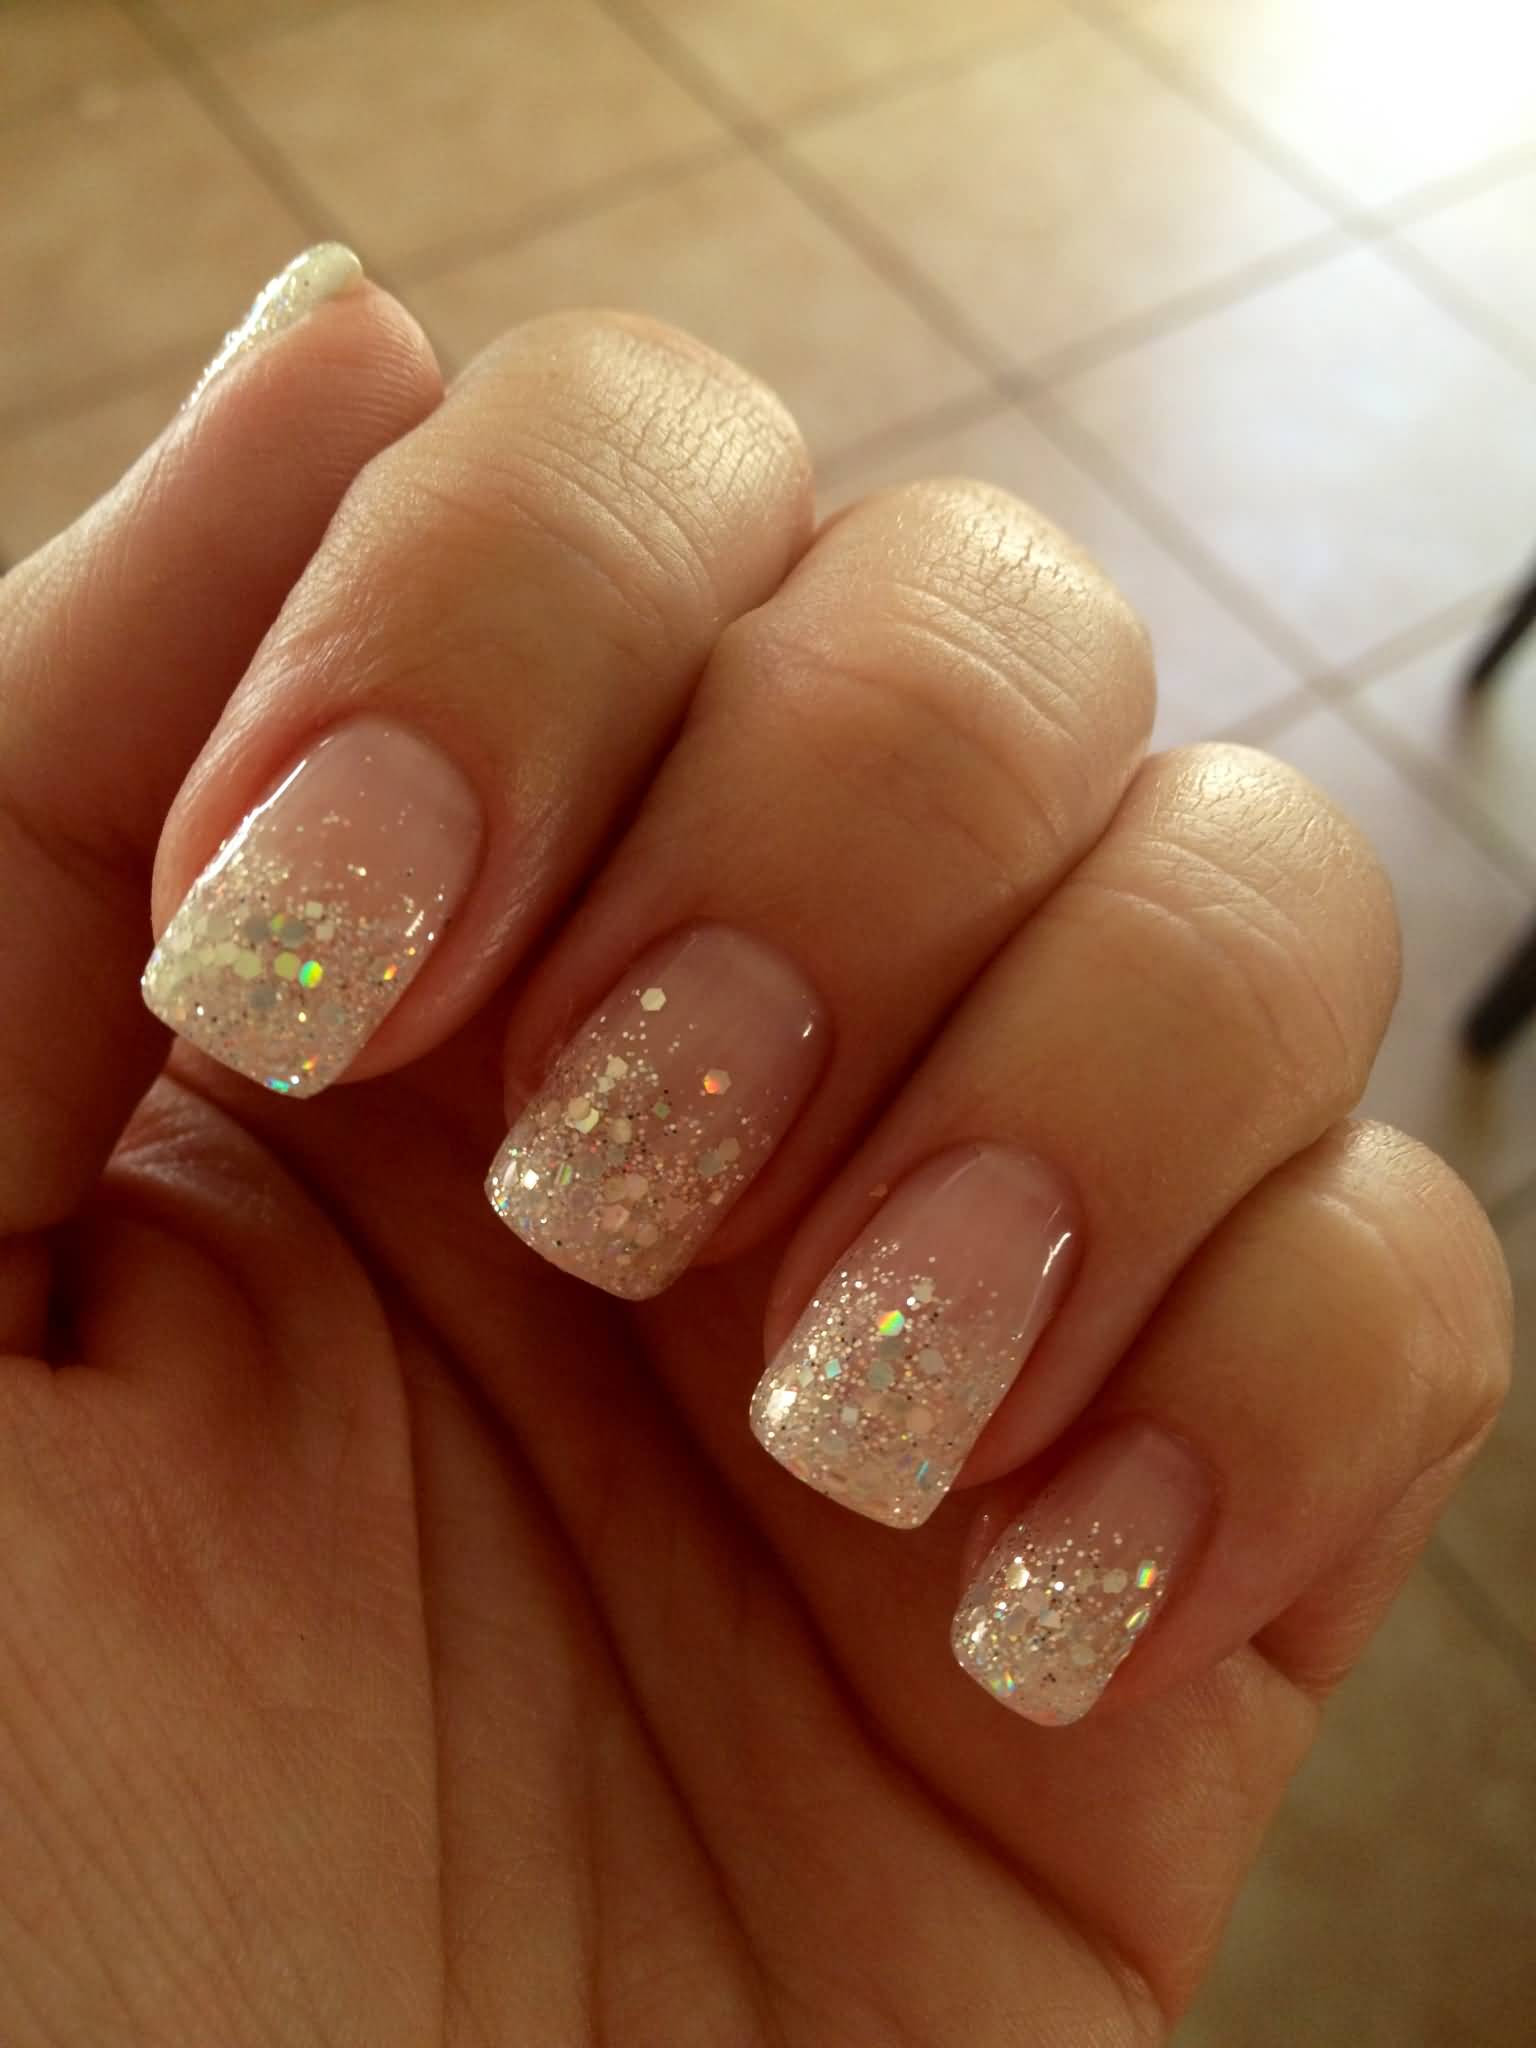 Gel Nails With Glitter Tips
 50 Most Beautiful Glitter French Tip Nail Art Design Ideas